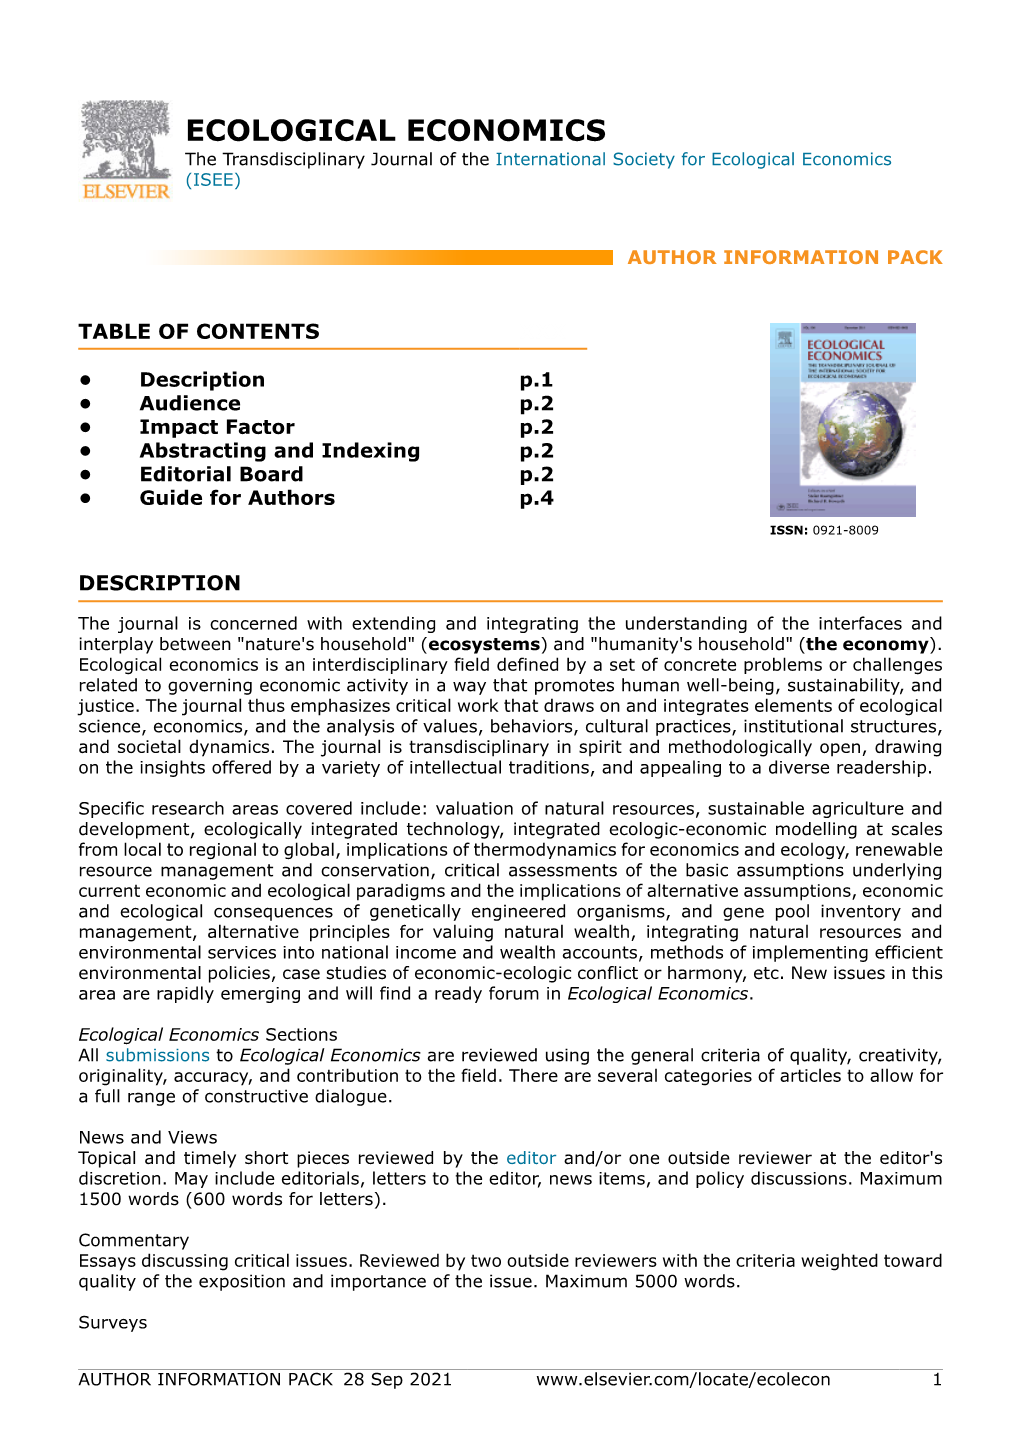 ECOLOGICAL ECONOMICS the Transdisciplinary Journal of the International Society for Ecological Economics (ISEE)